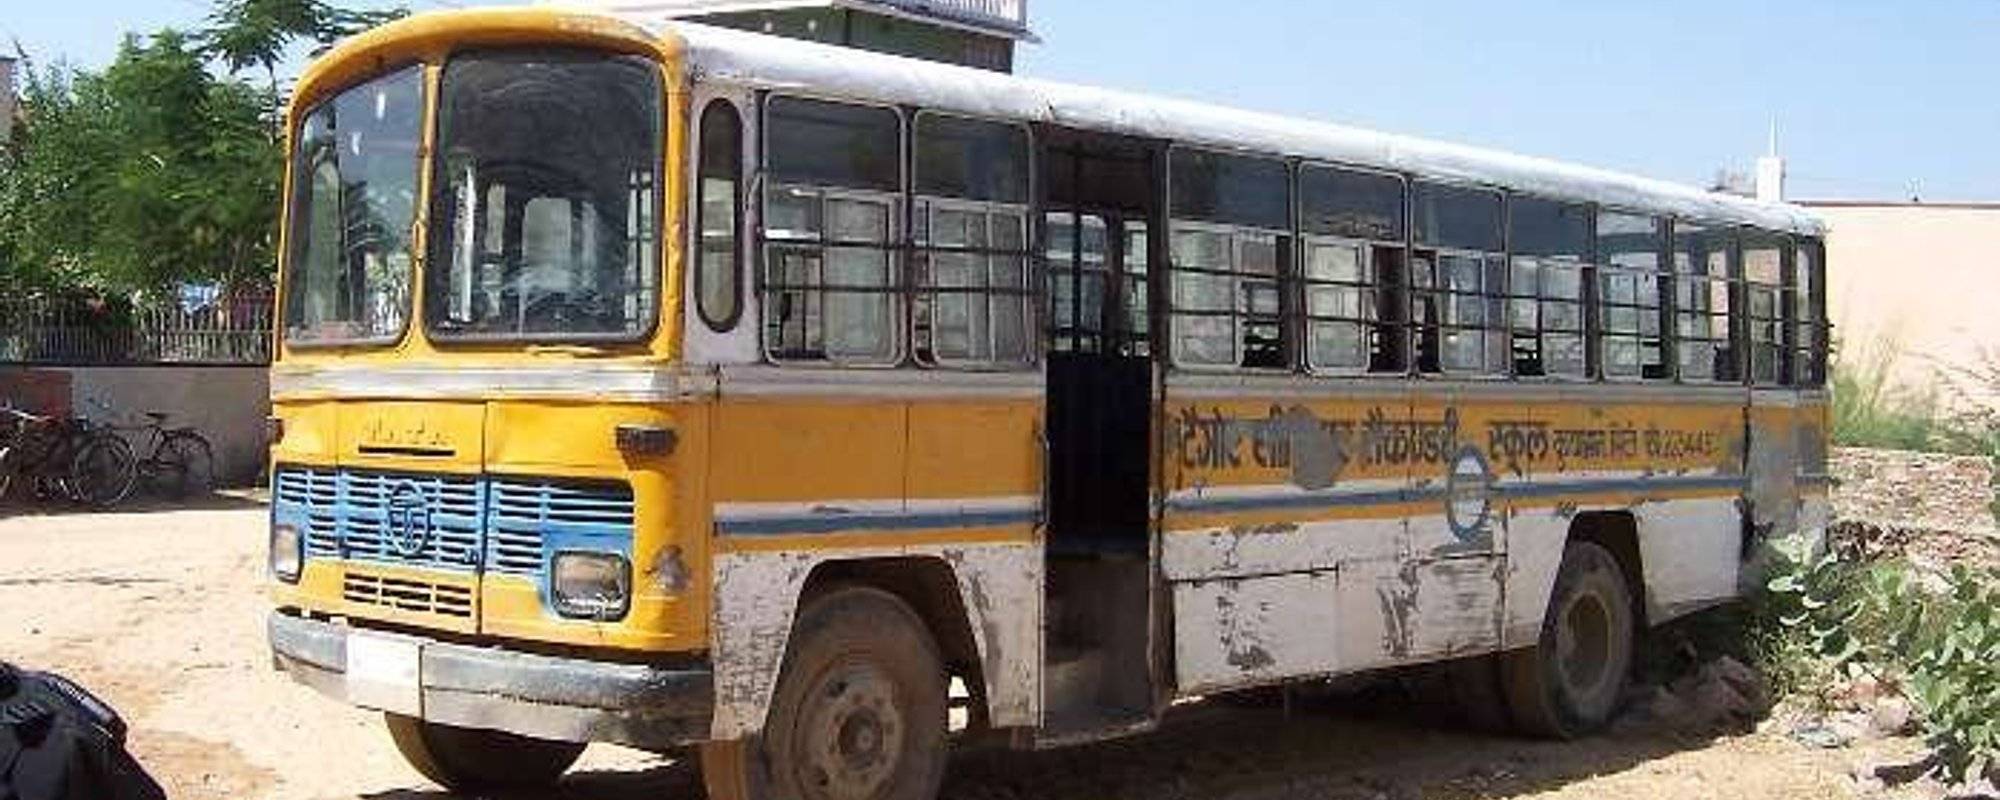 Prelude To - The Bus Ride From Hell: The Time I Caught A 'Sleeper' Bus In India